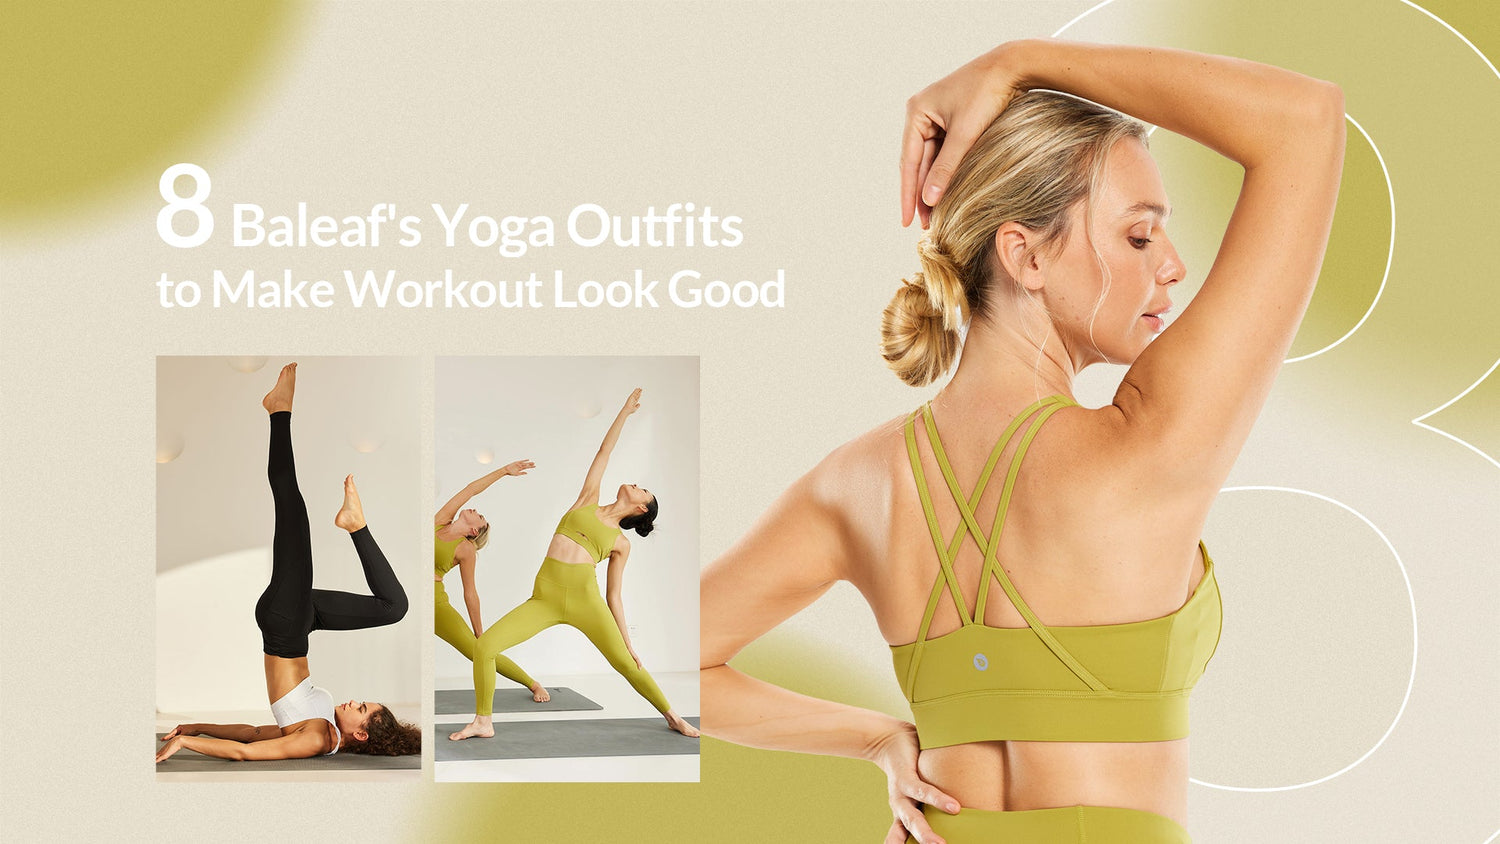 8 Baleaf's Yoga Outfits to Make Workout Look Good